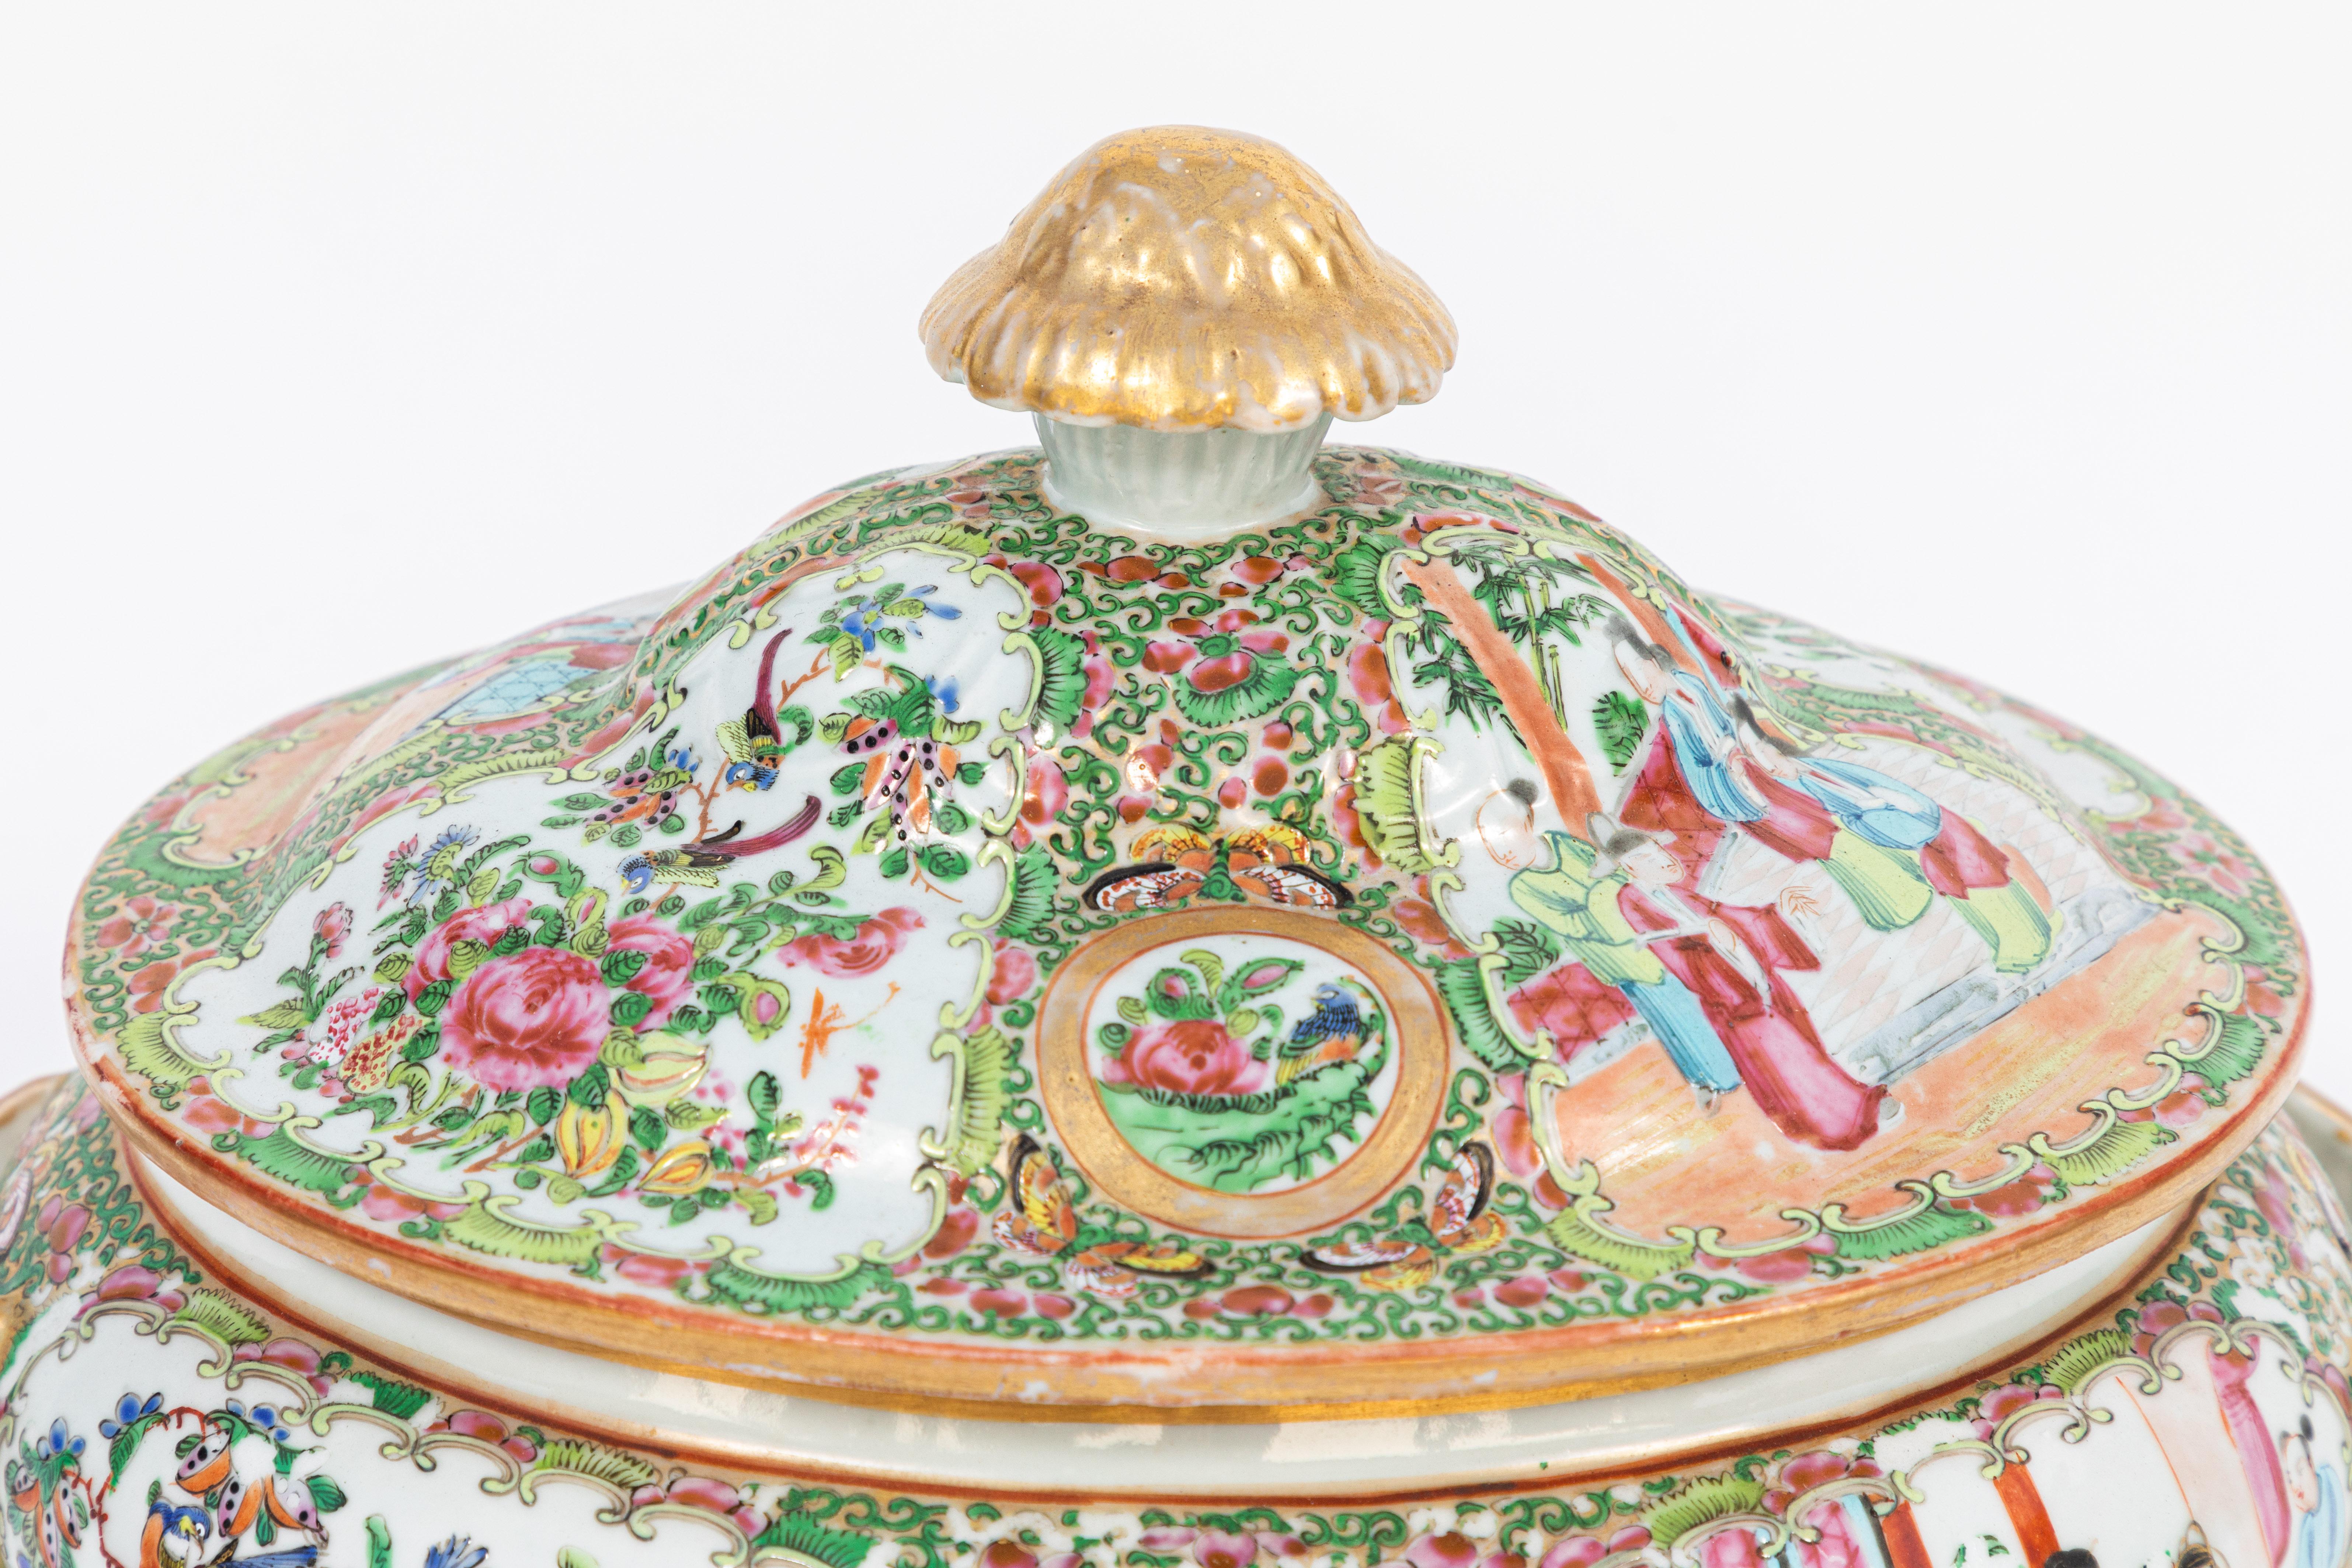 19th century rose medallion covered tureen and platter.
The measurement of the platter is: 13 inches deep x 16 inches wide.